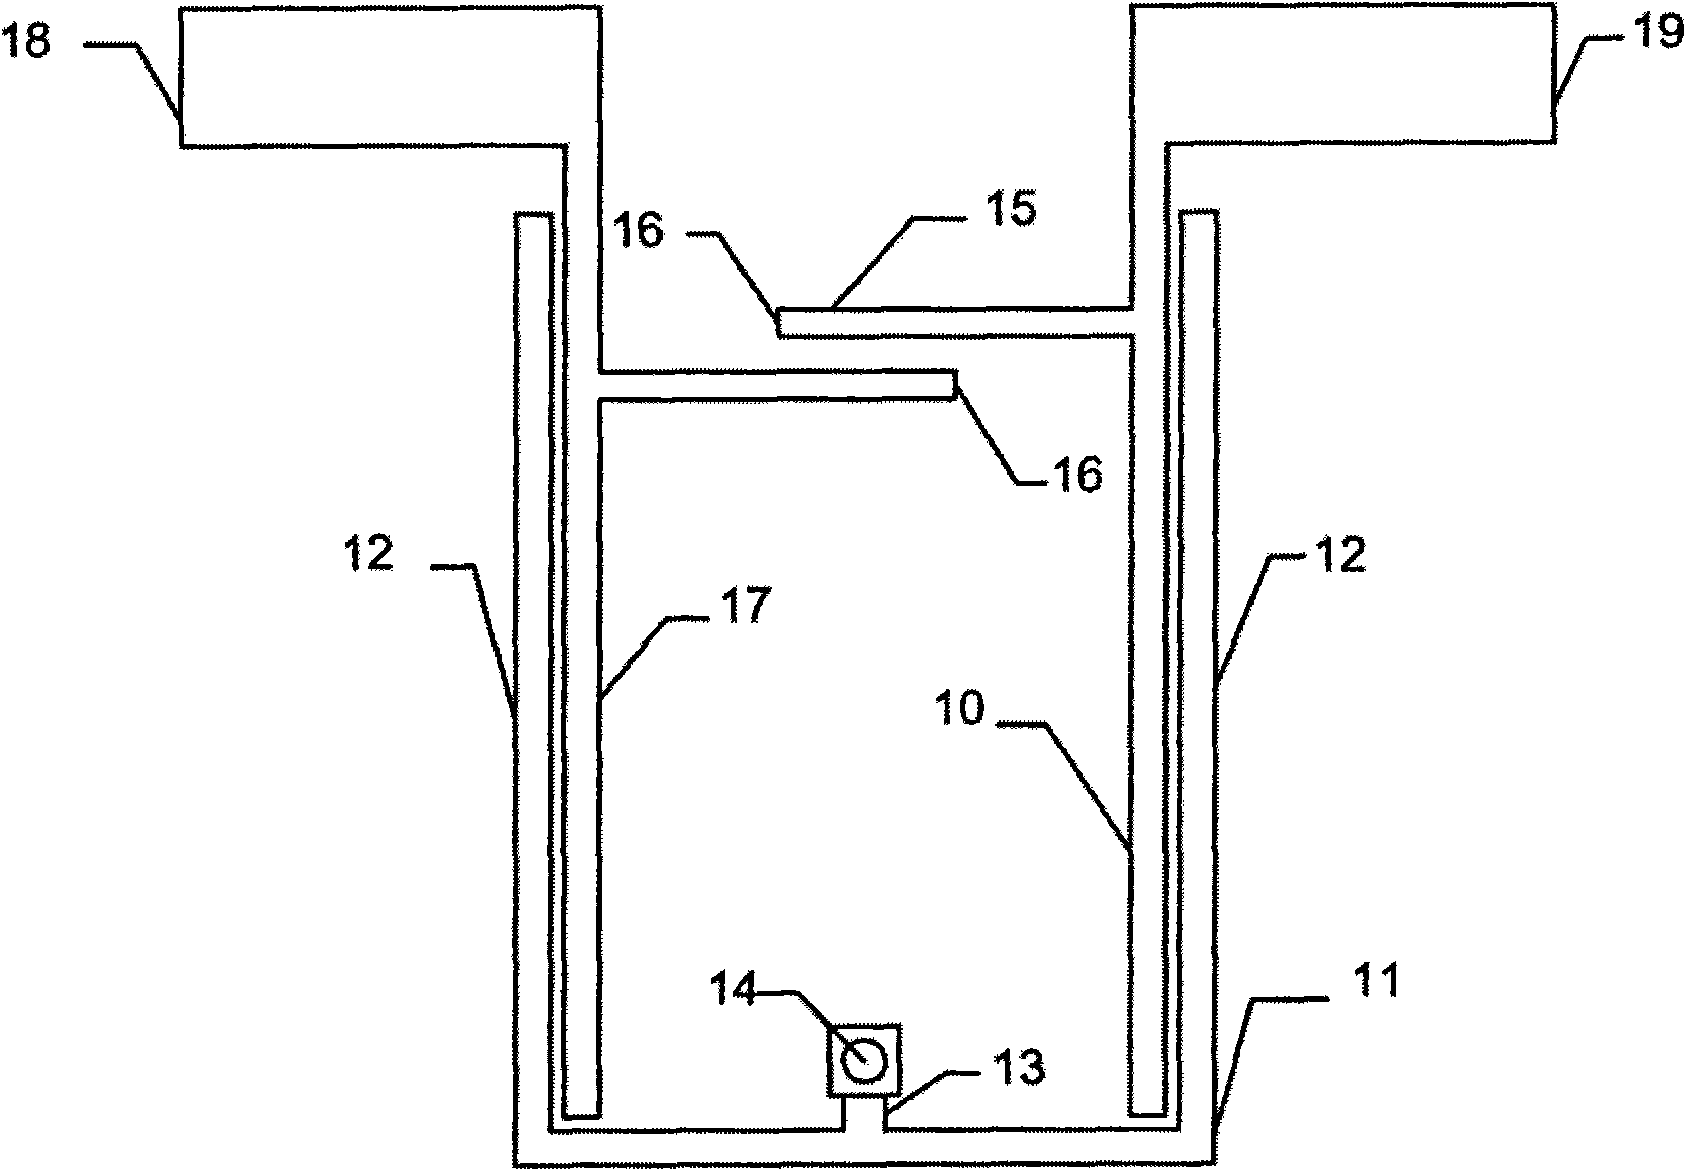 Source end coupling microstrip filter